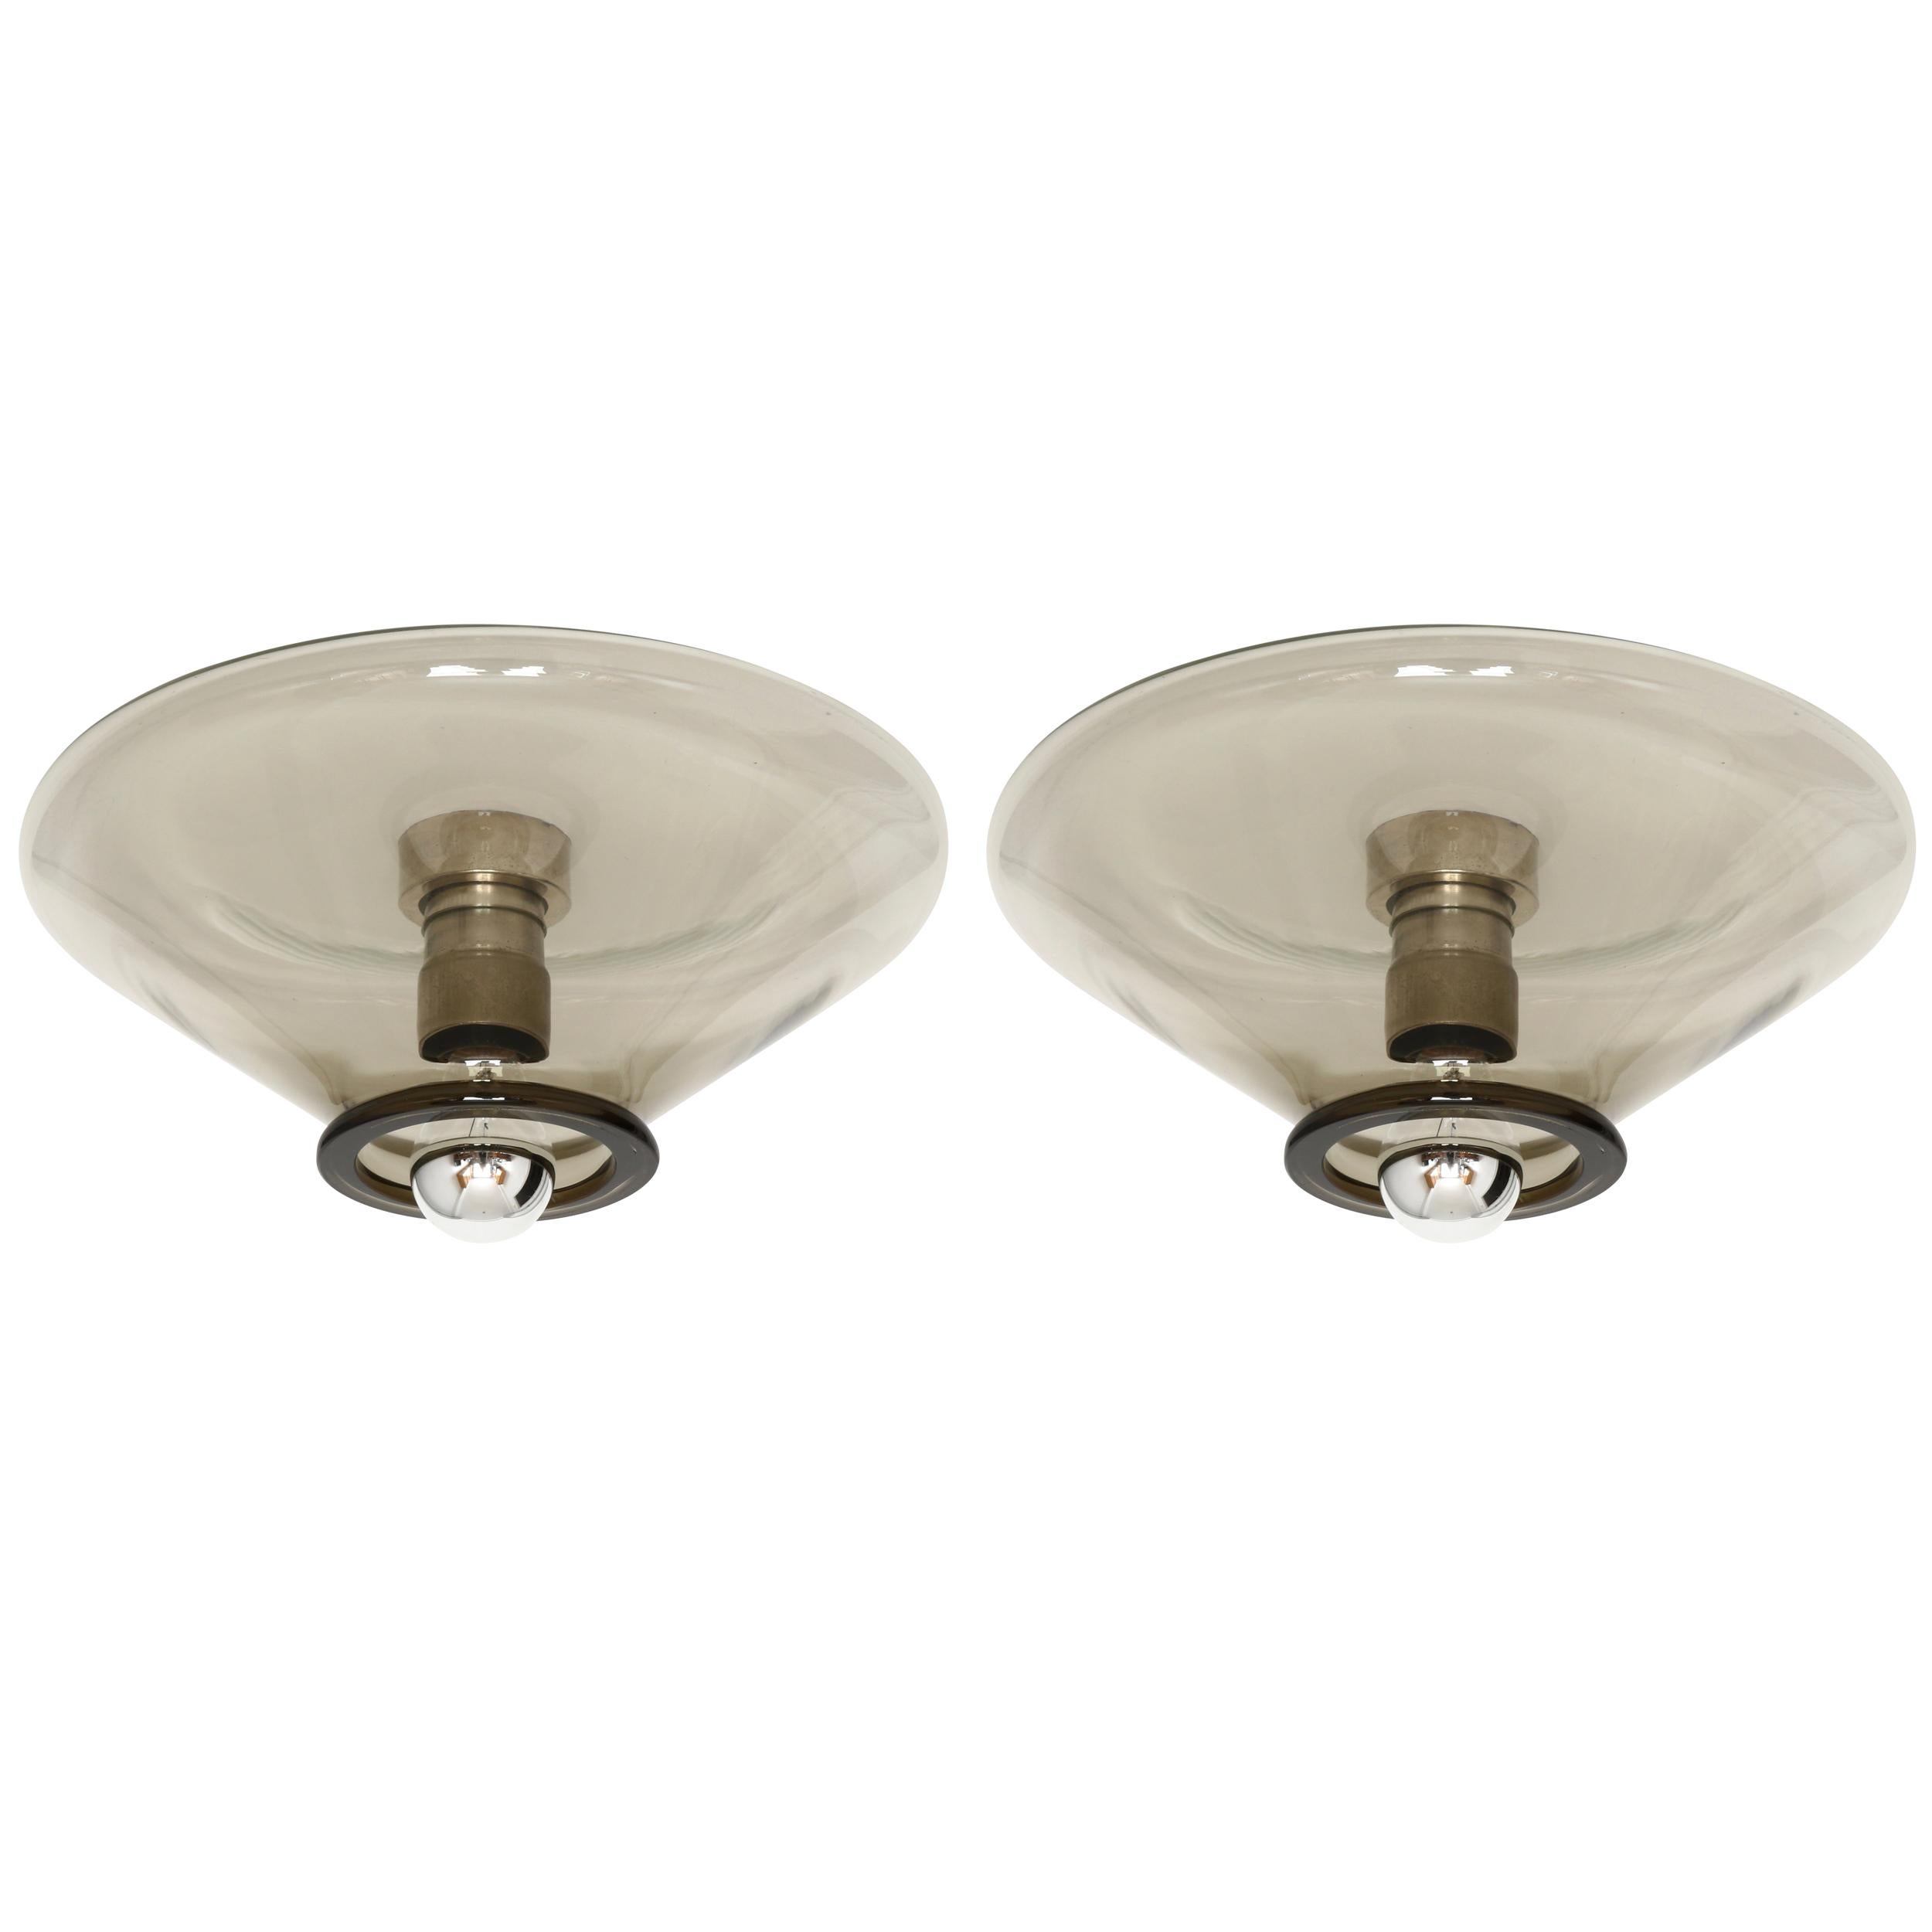 Pair of Flush Mounts by Giusto Toso for Leucos